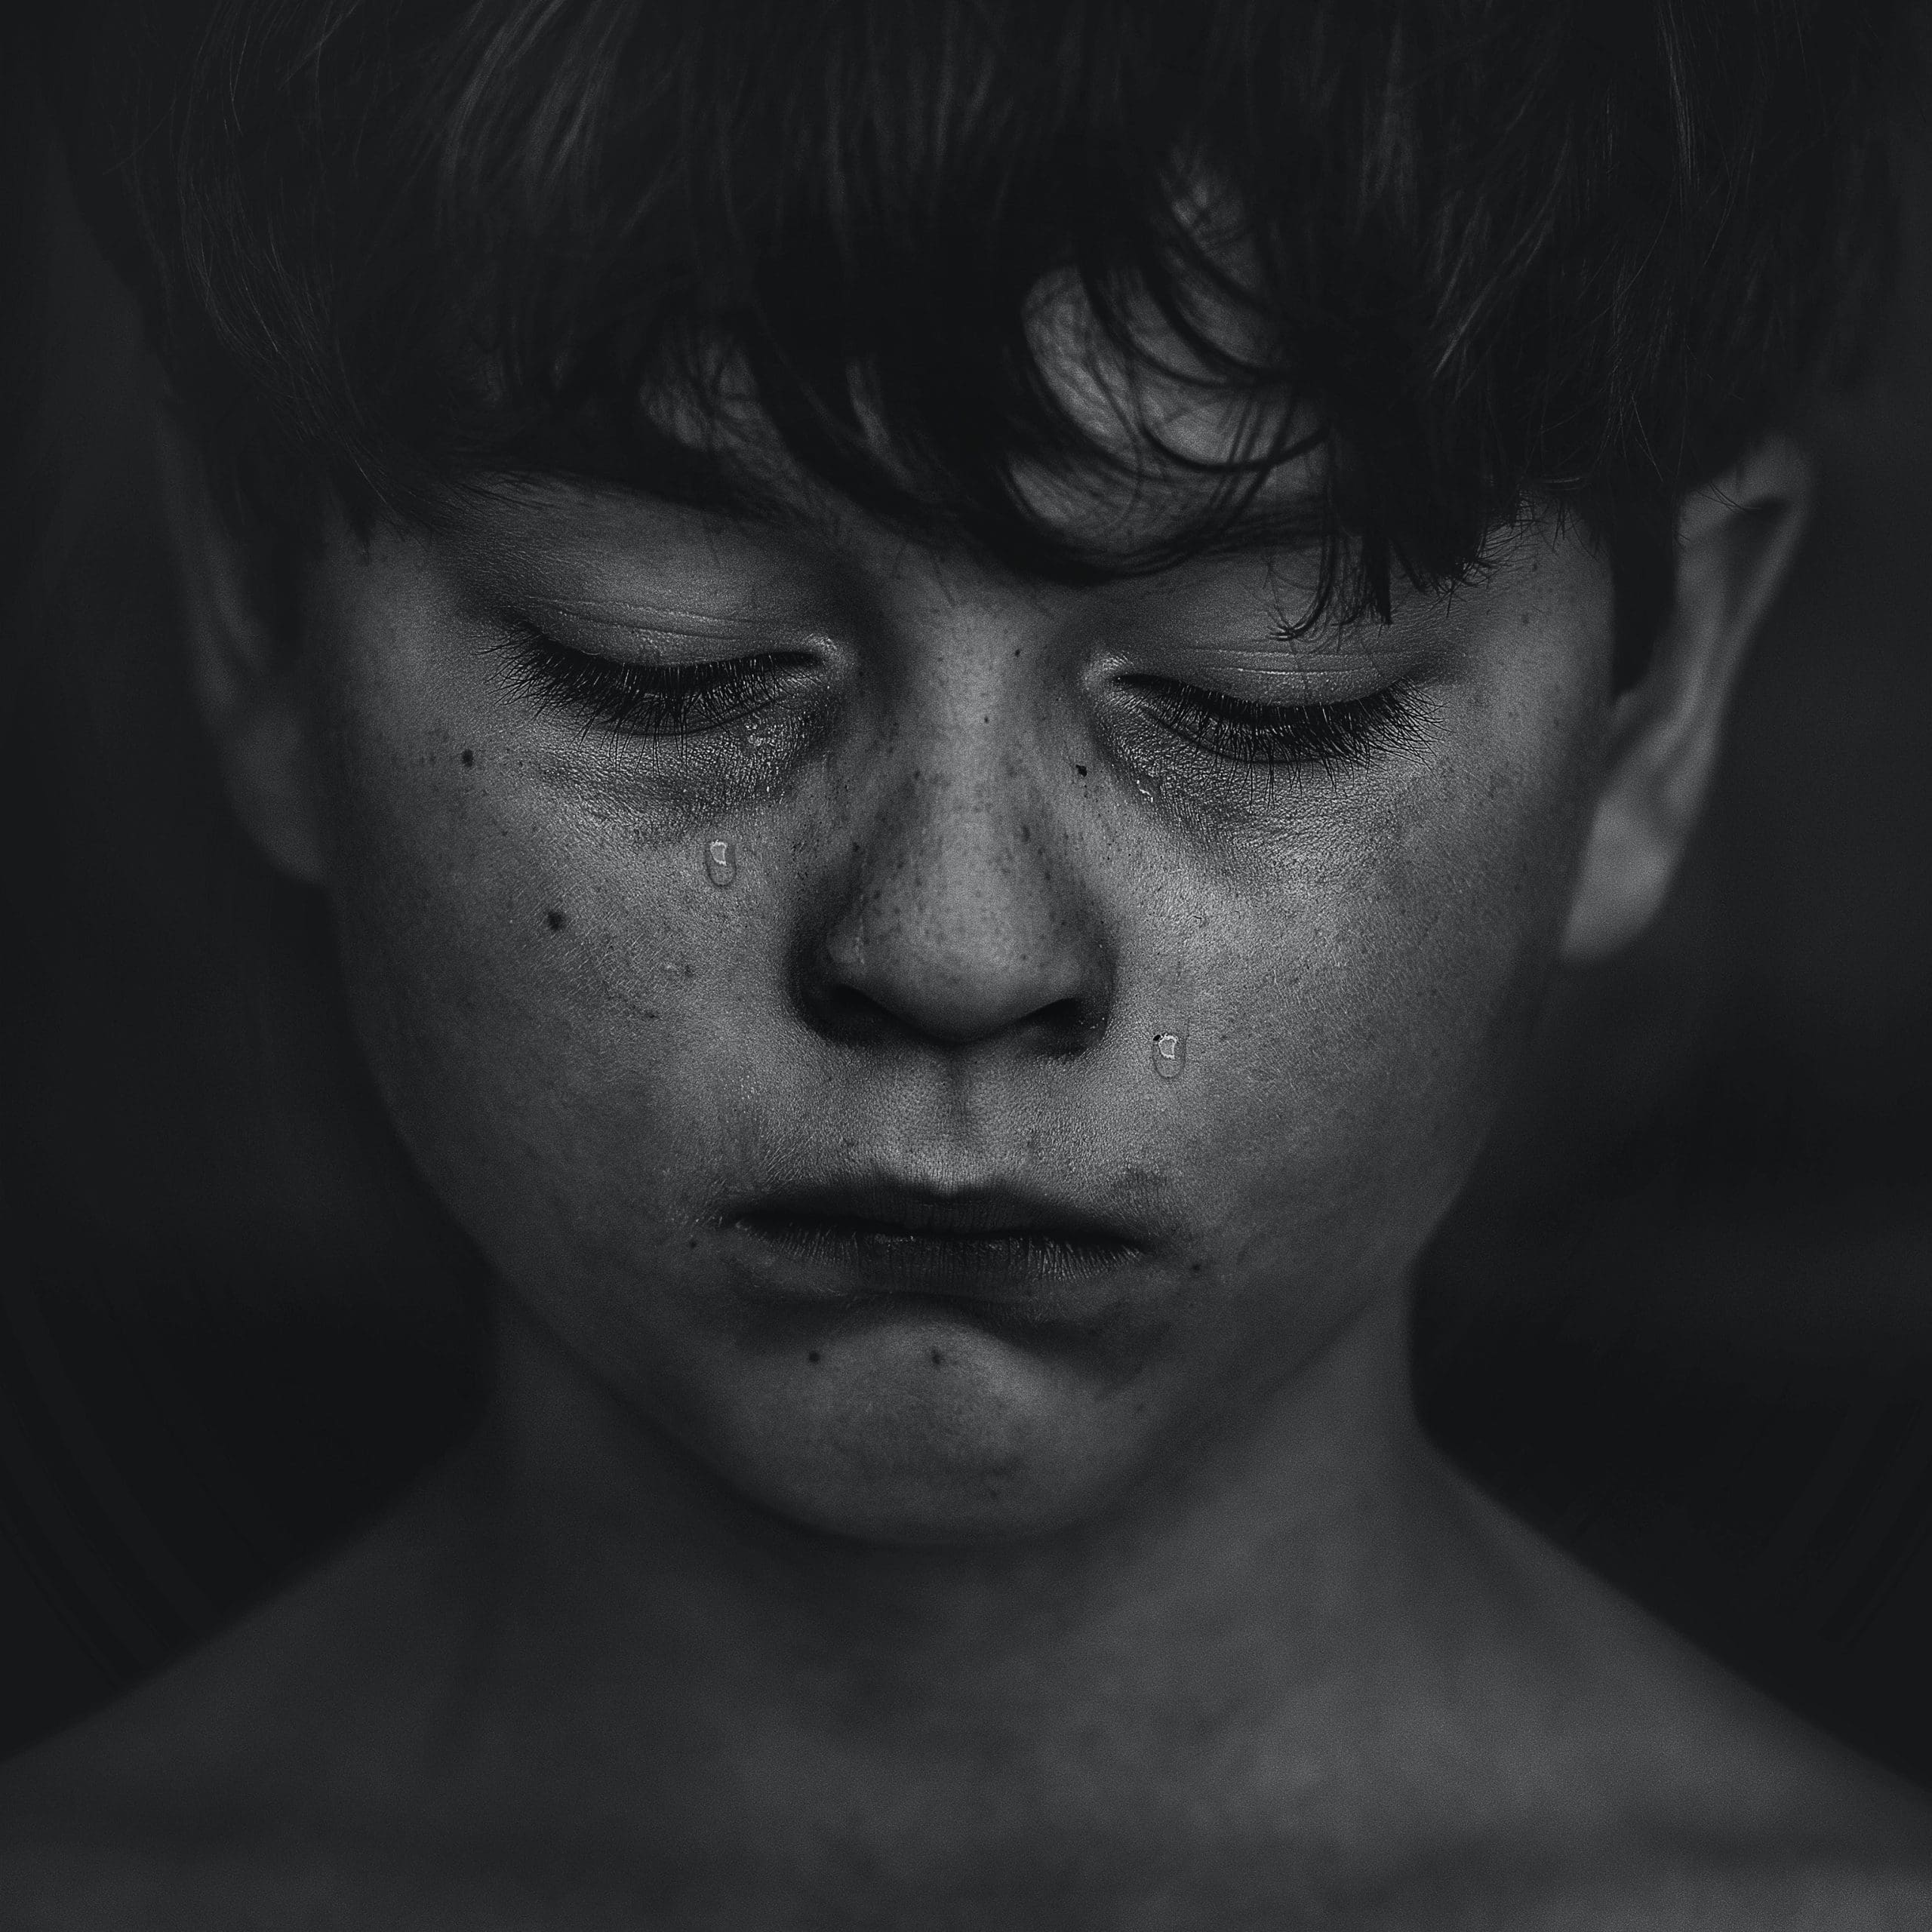 Long-term health outcomes of childhood sexual abuse photo